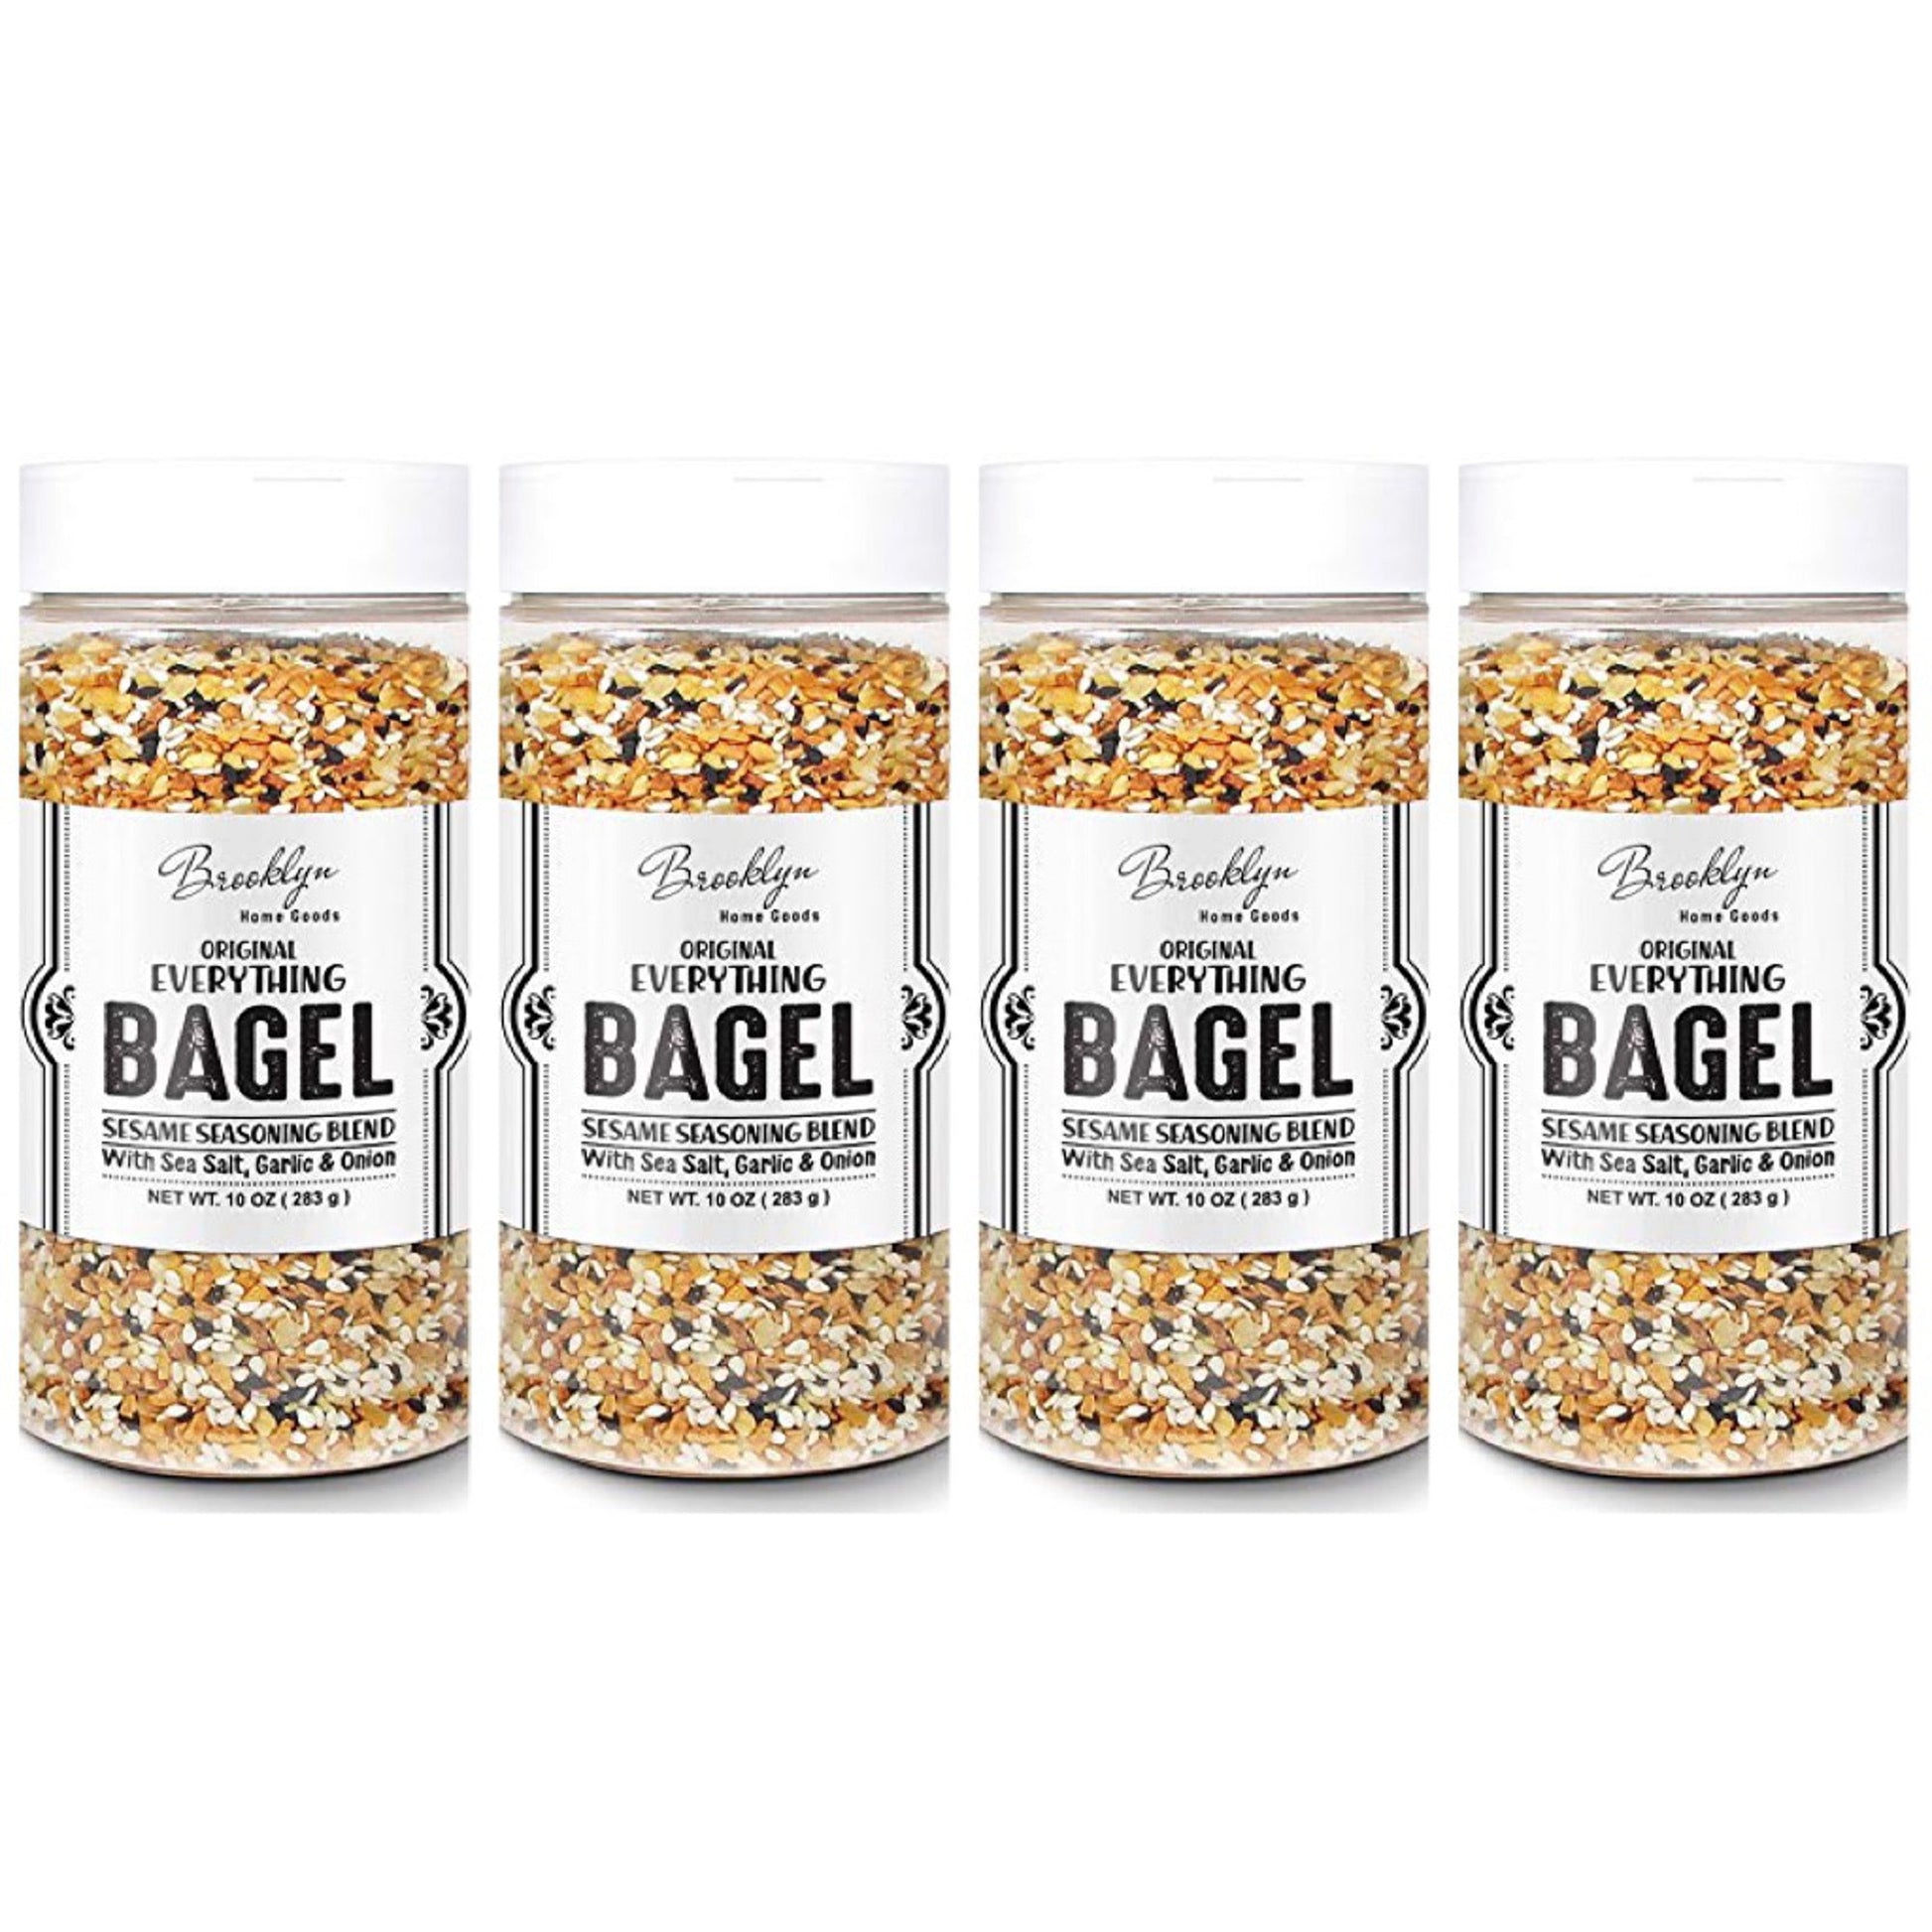 Everything Bagel Seasoning Blend Original By BHG, XL 10 Ounce Jar - Sesame  Seasoning Spice Shaker, Delicious Blend of Sea Salt and Spices